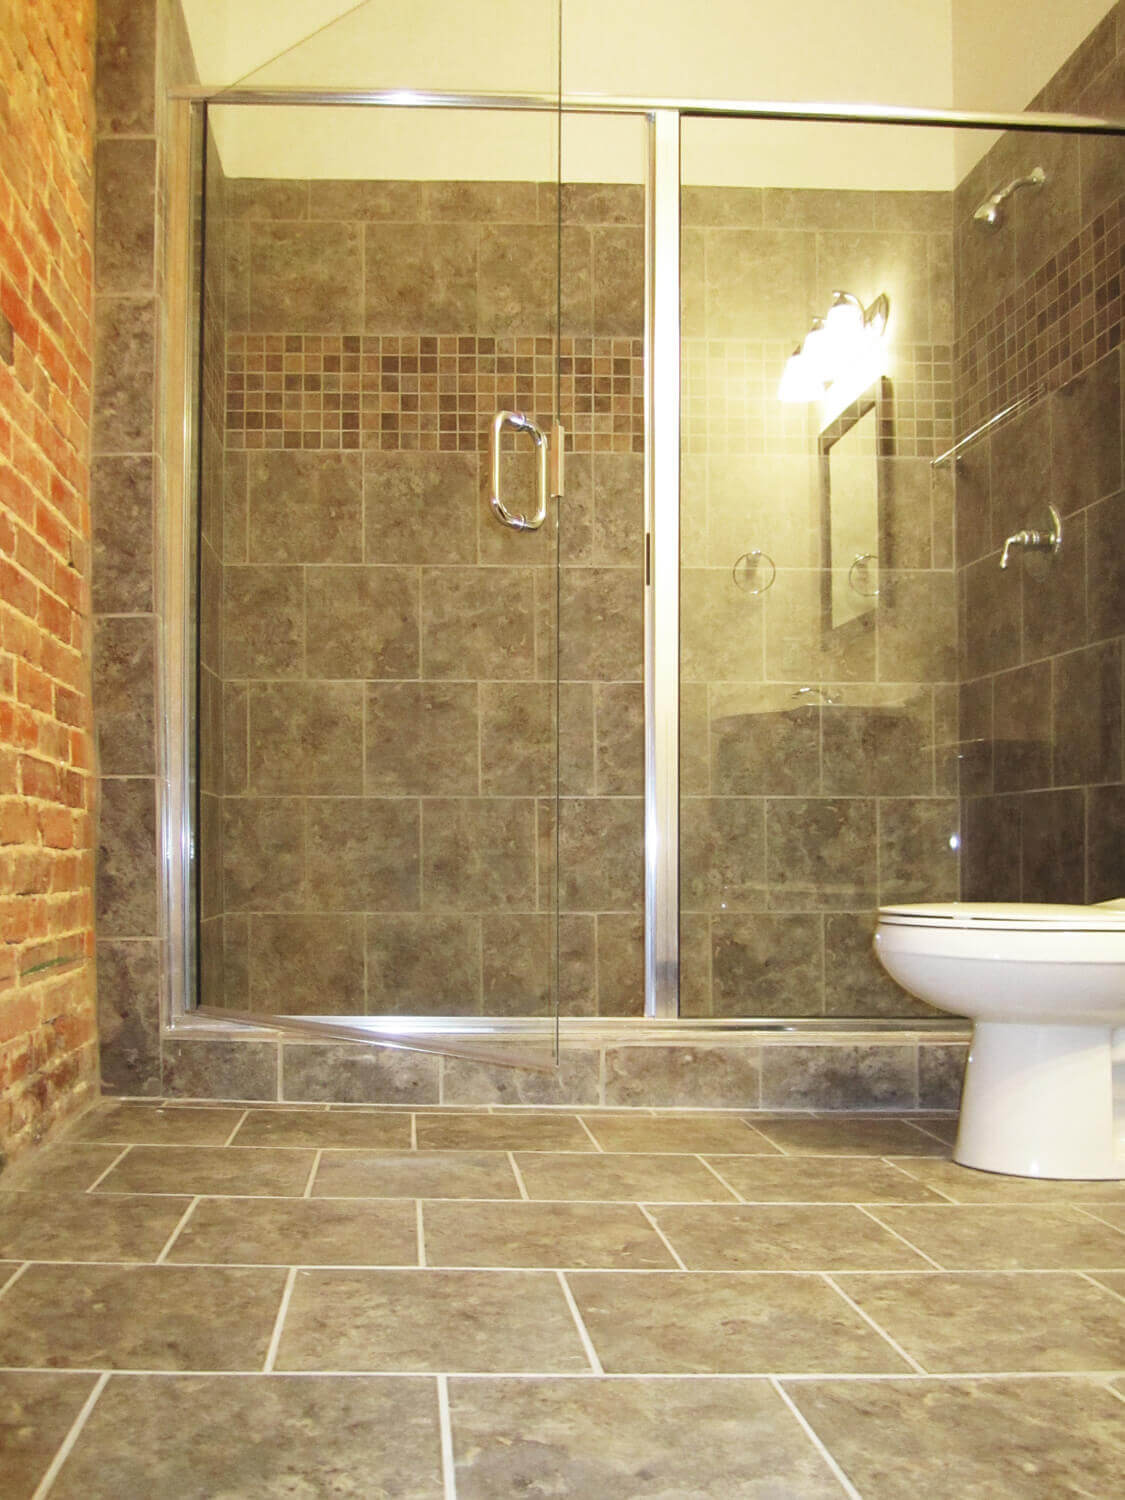 Printing Press Lofts Designed by Foshee Architecture - Apartment Bathroom with a Tile Shower